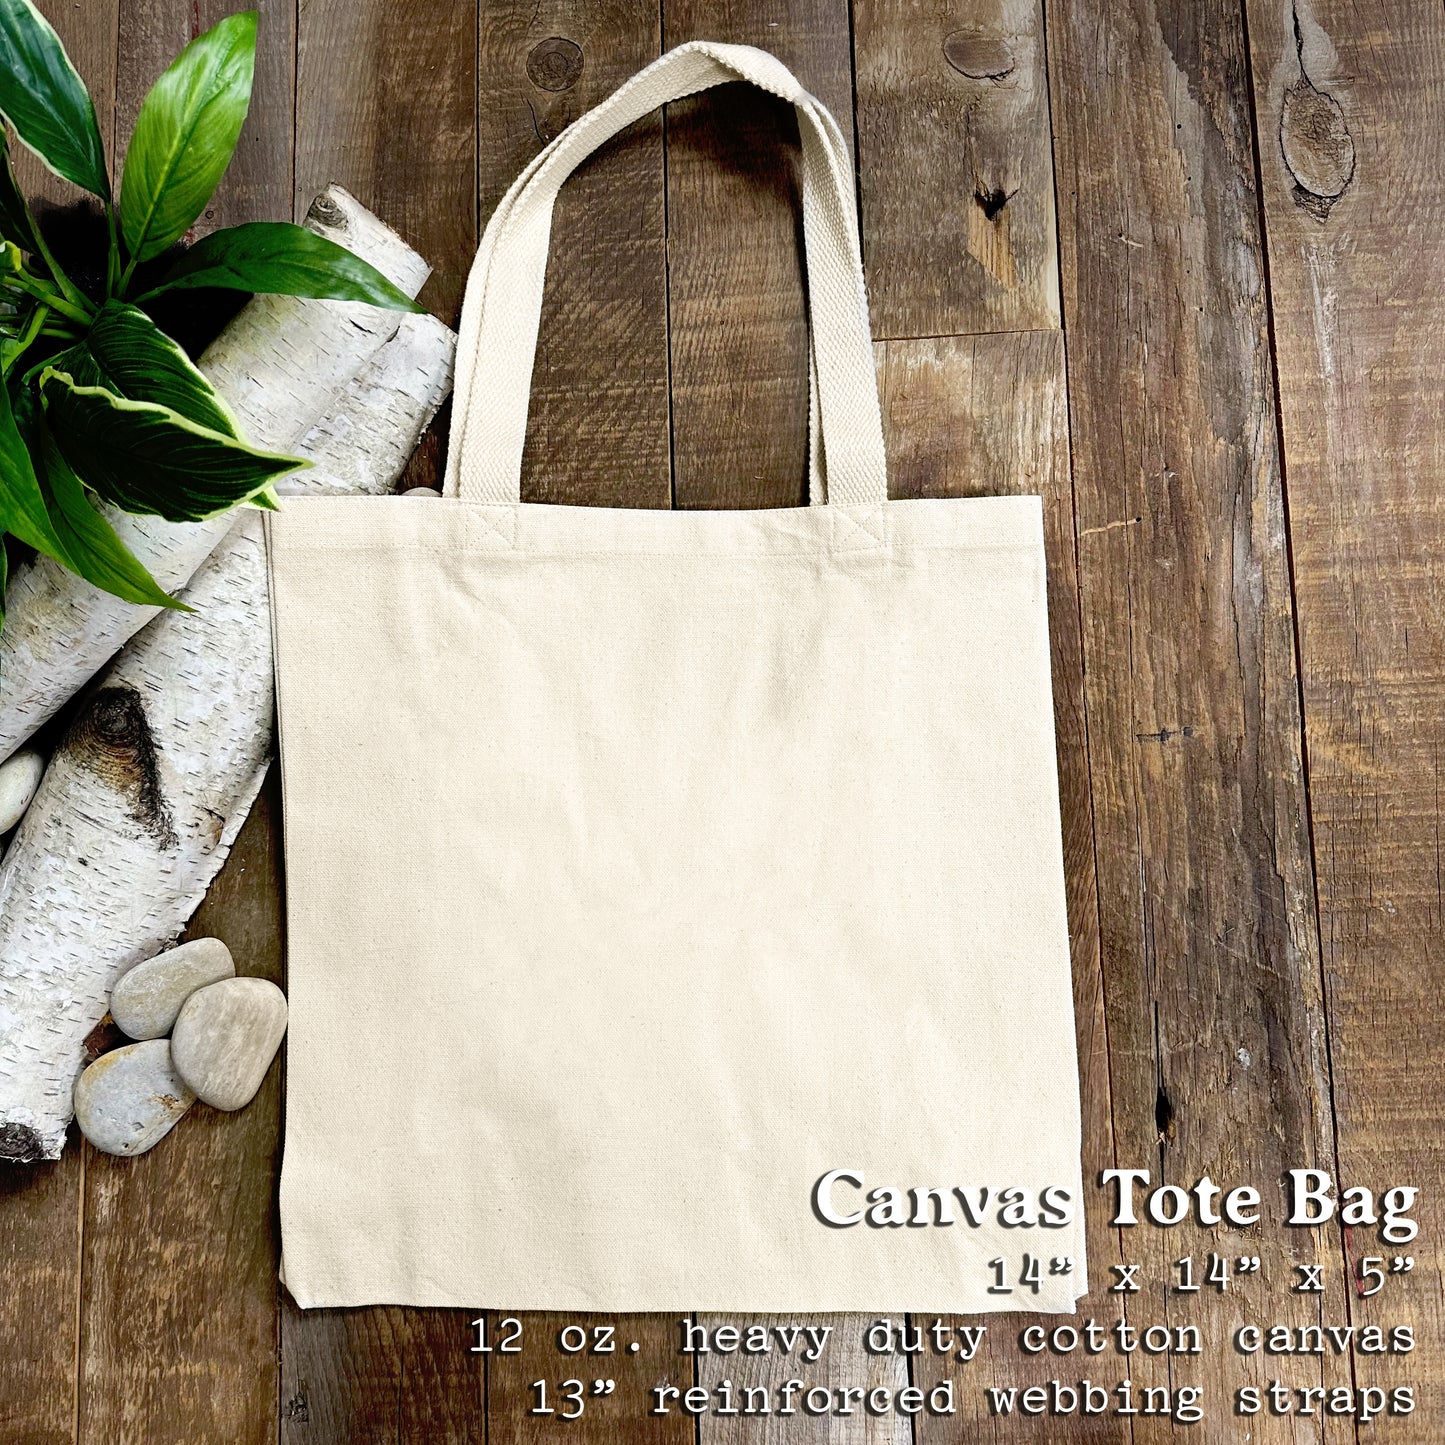 Adventure Awaits w/ City, State - Canvas Tote Bag